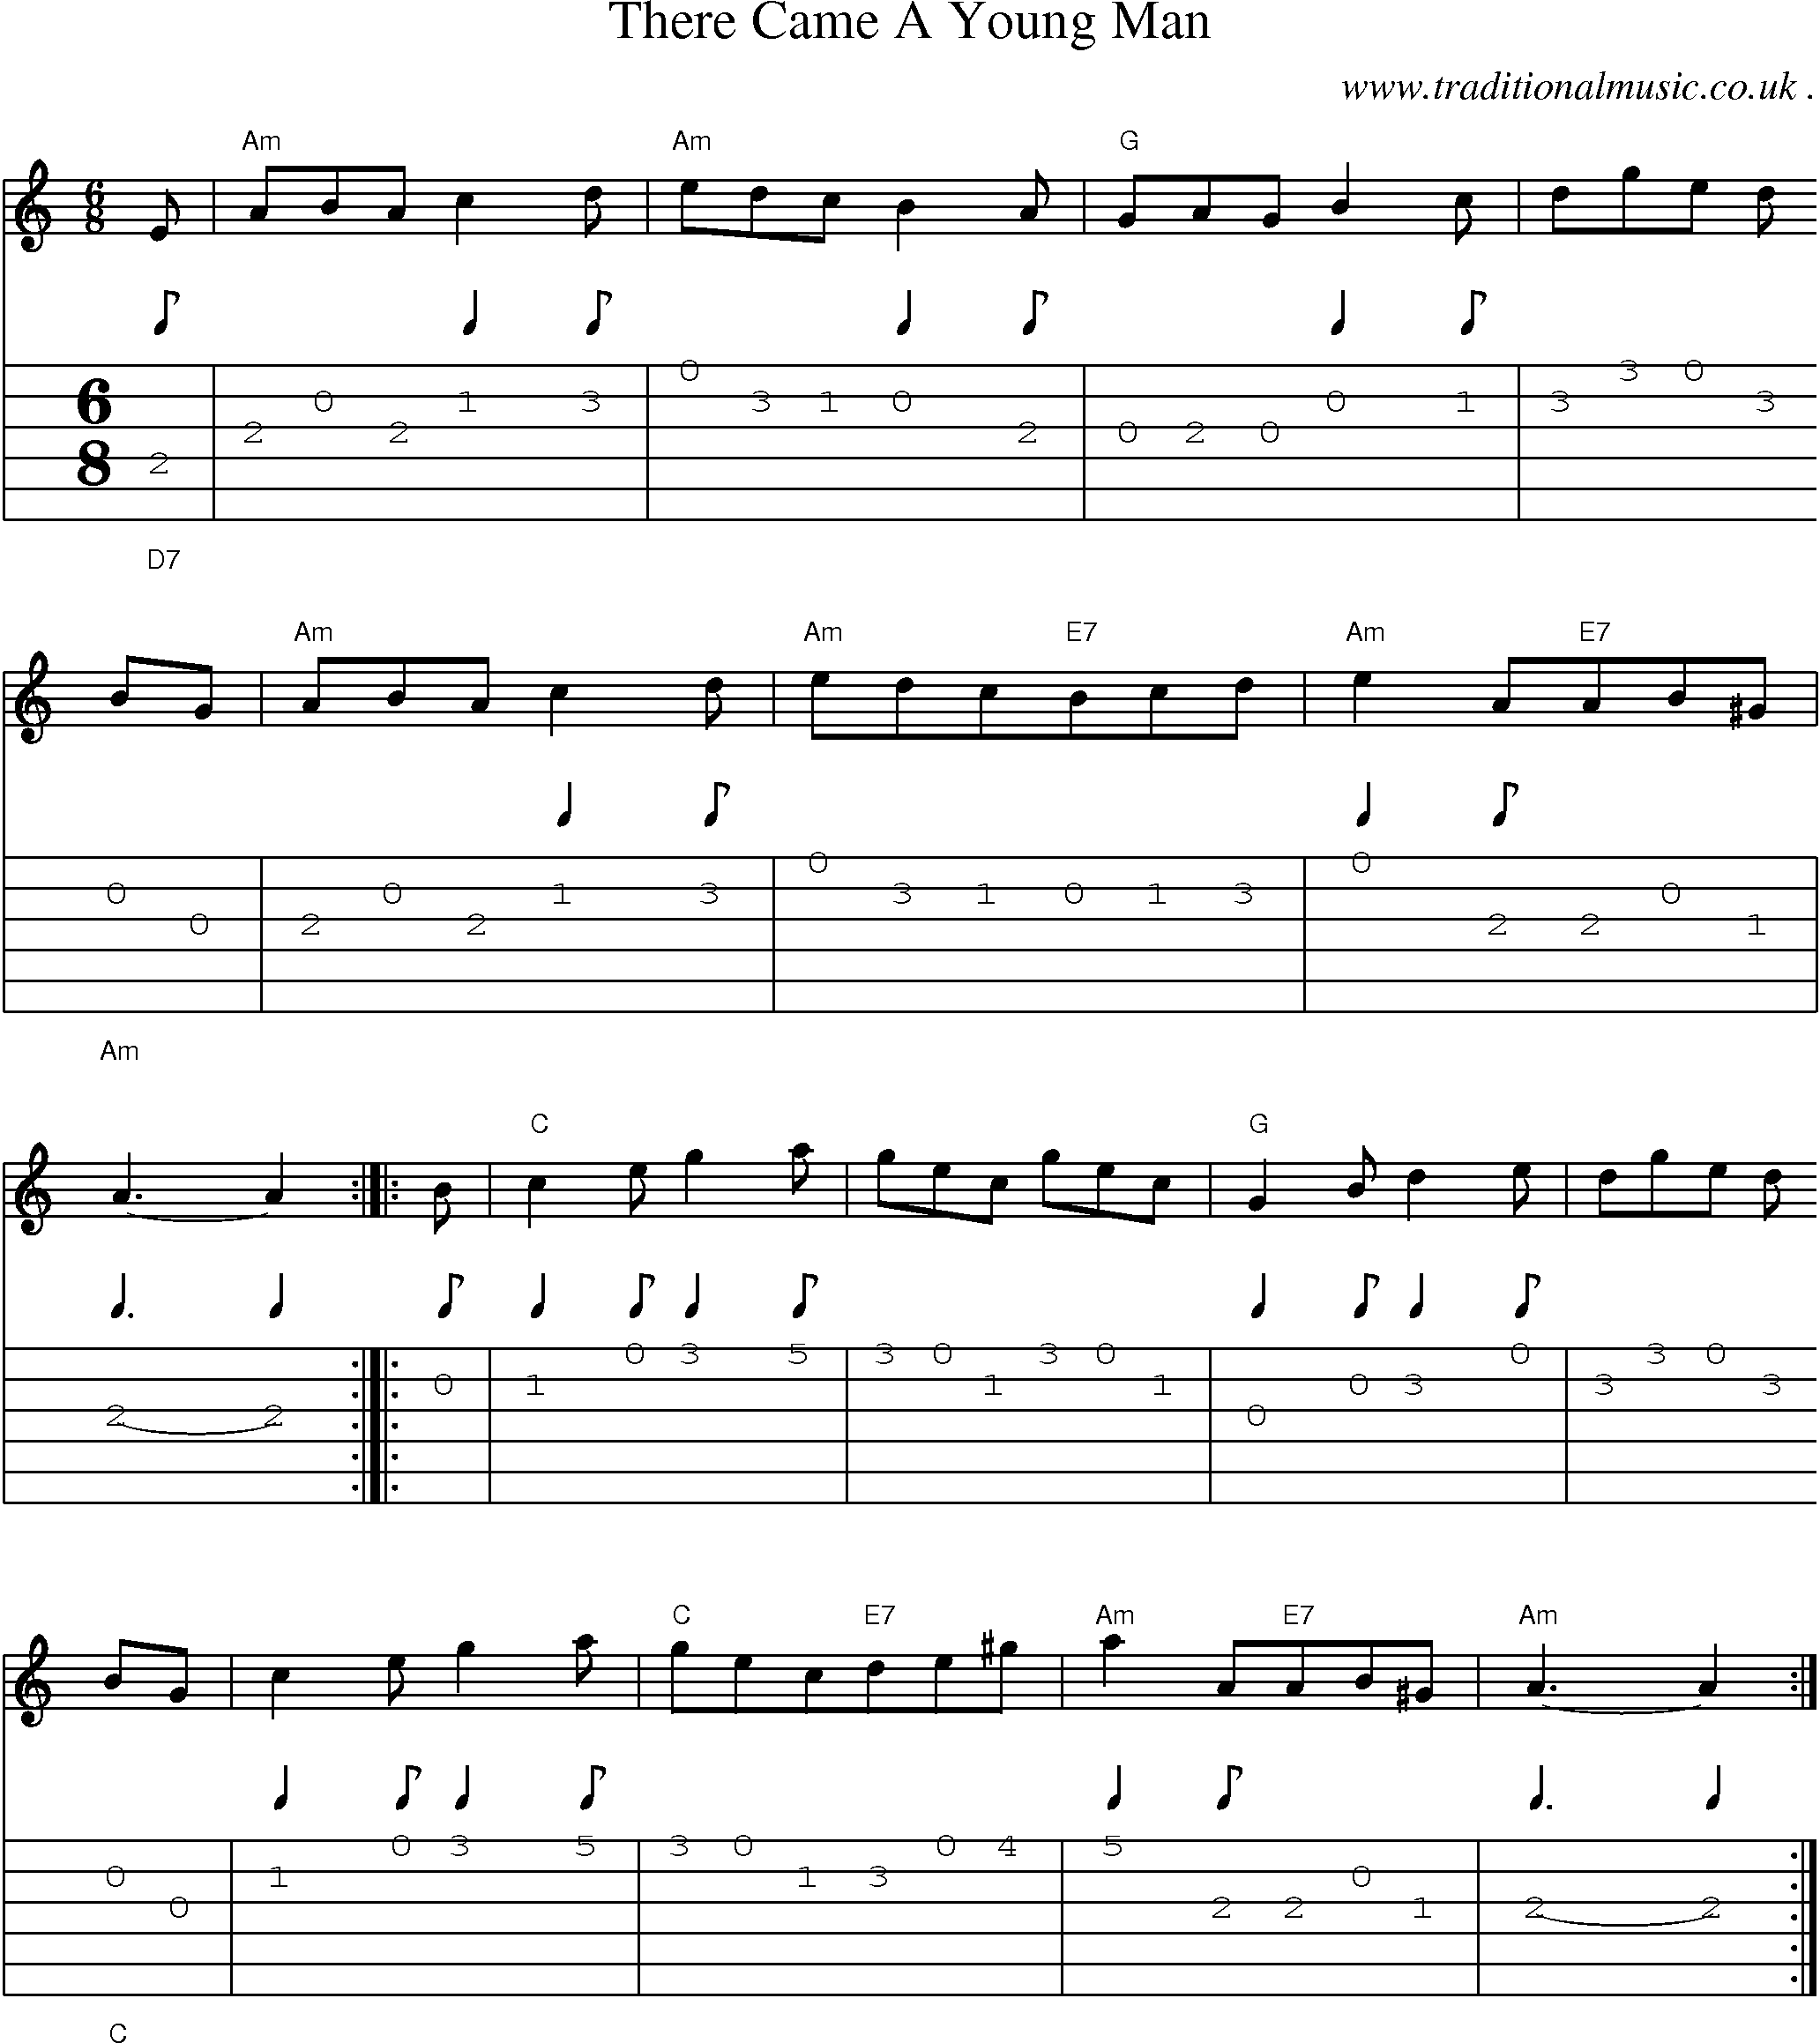 Sheet-Music and Guitar Tabs for There Came A Young Man